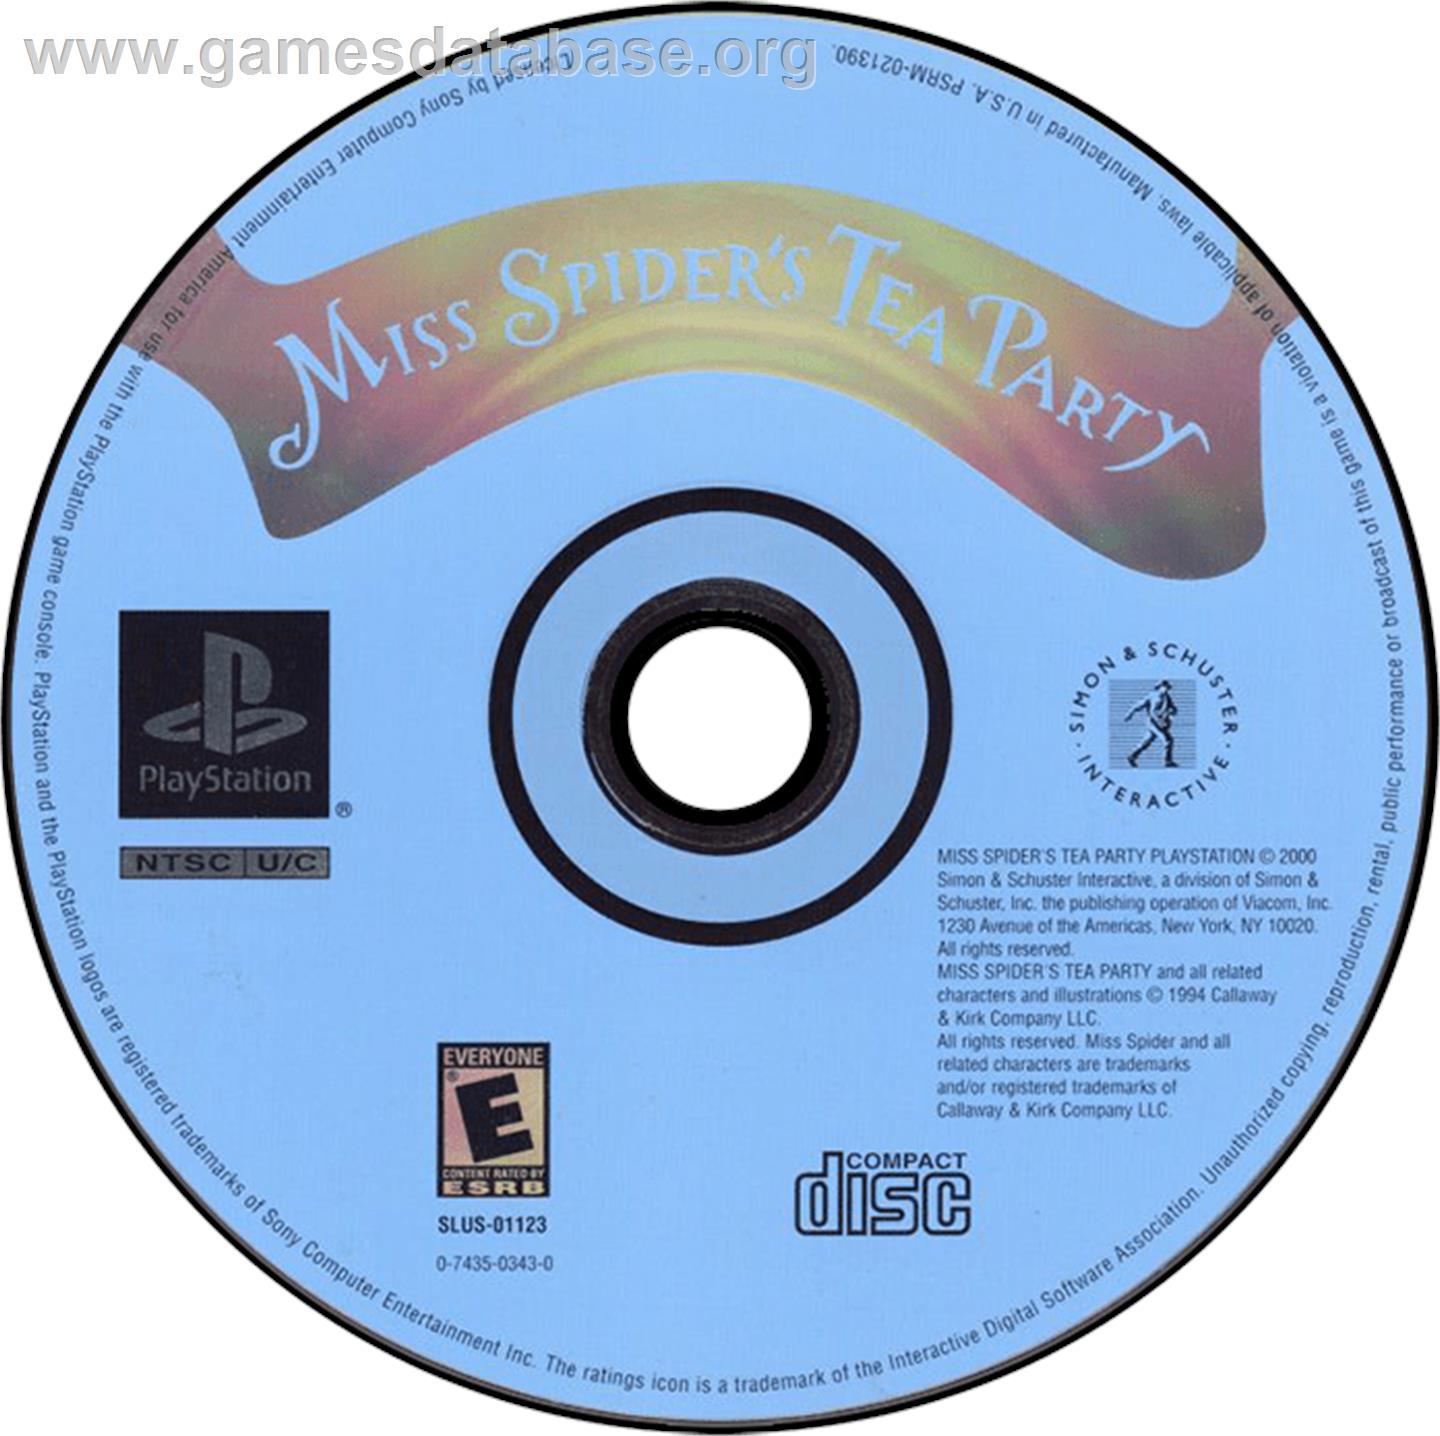 Miss Spider's Tea Party - Sony Playstation - Artwork - Disc